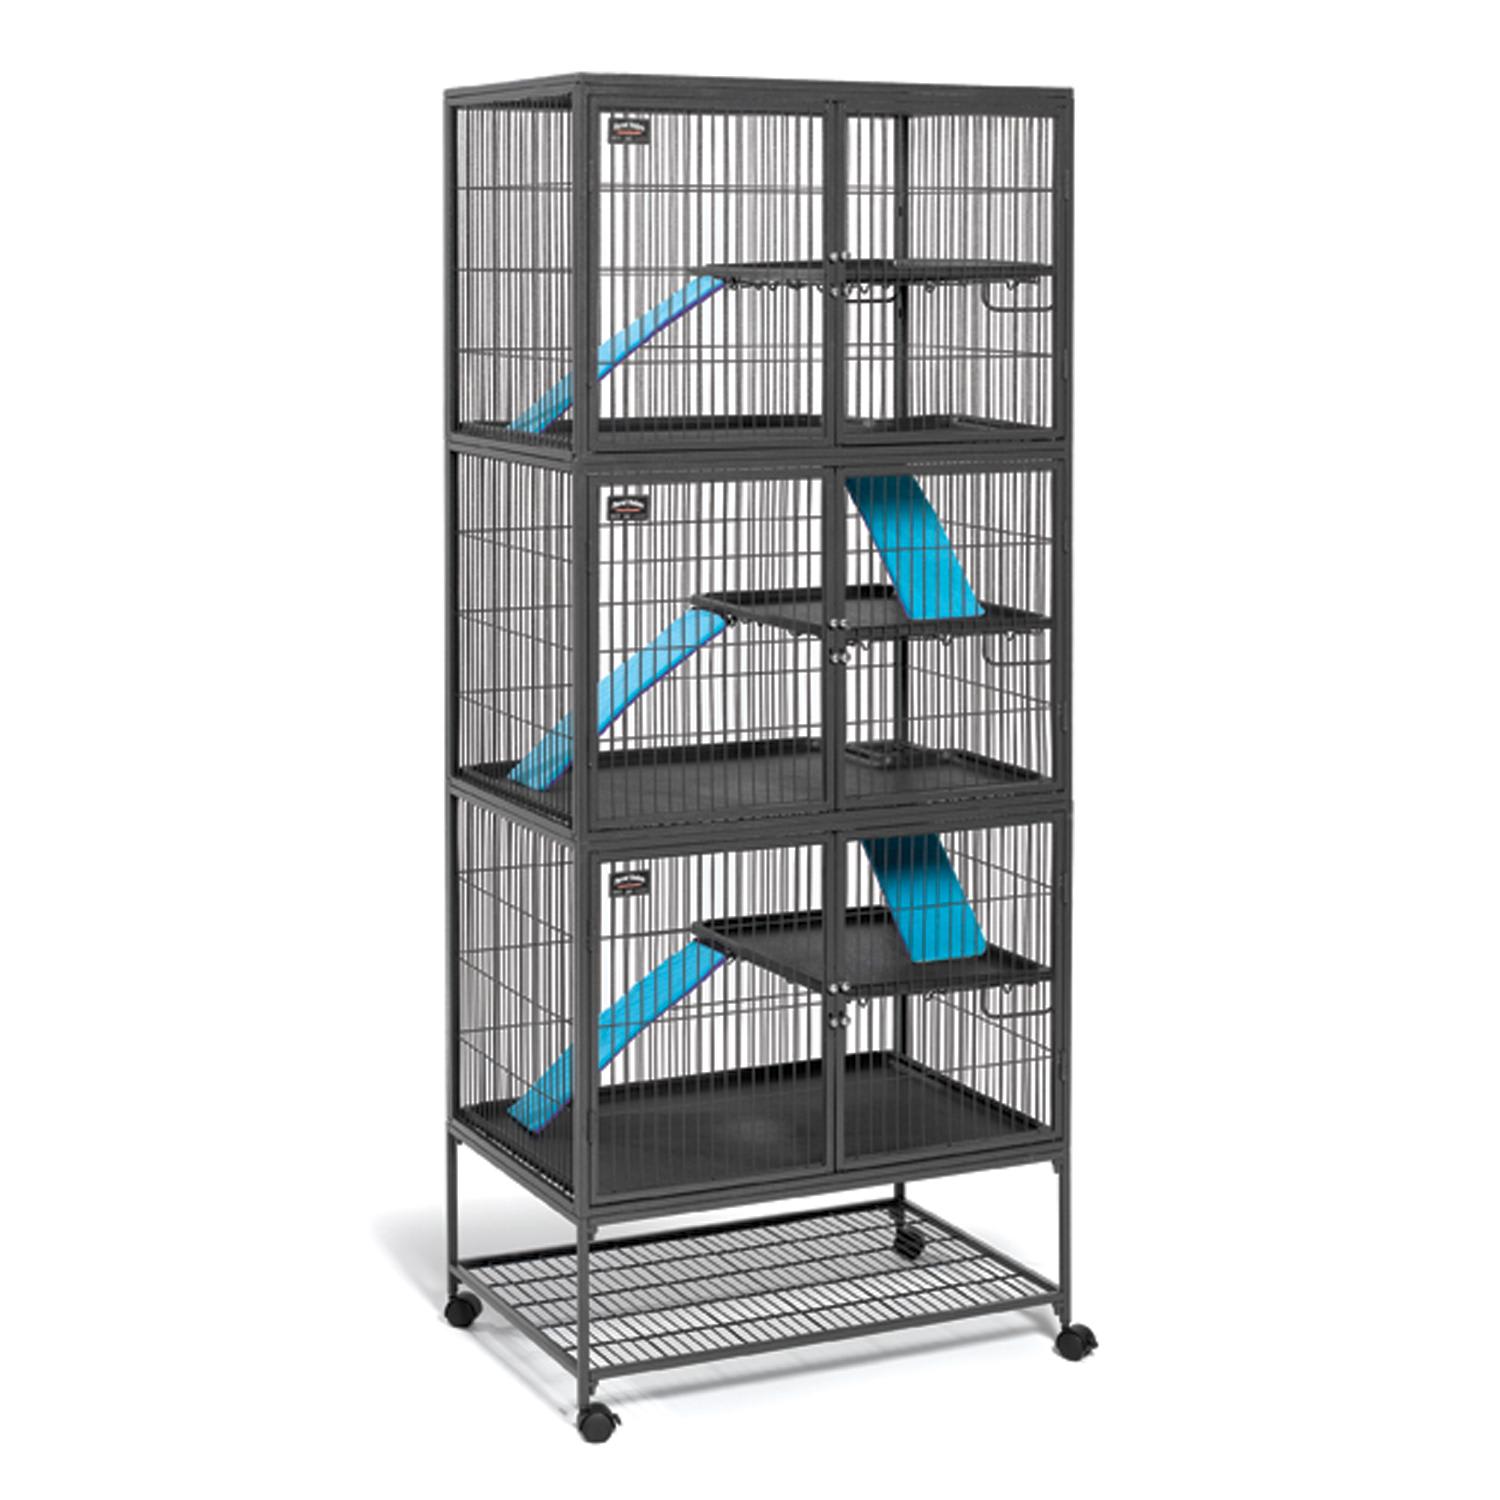 Photos - Rodent Cage / House Midwest Ferret Nation Add-On Unit, 36" L X 25" W X 24" H, 36 IN, G 